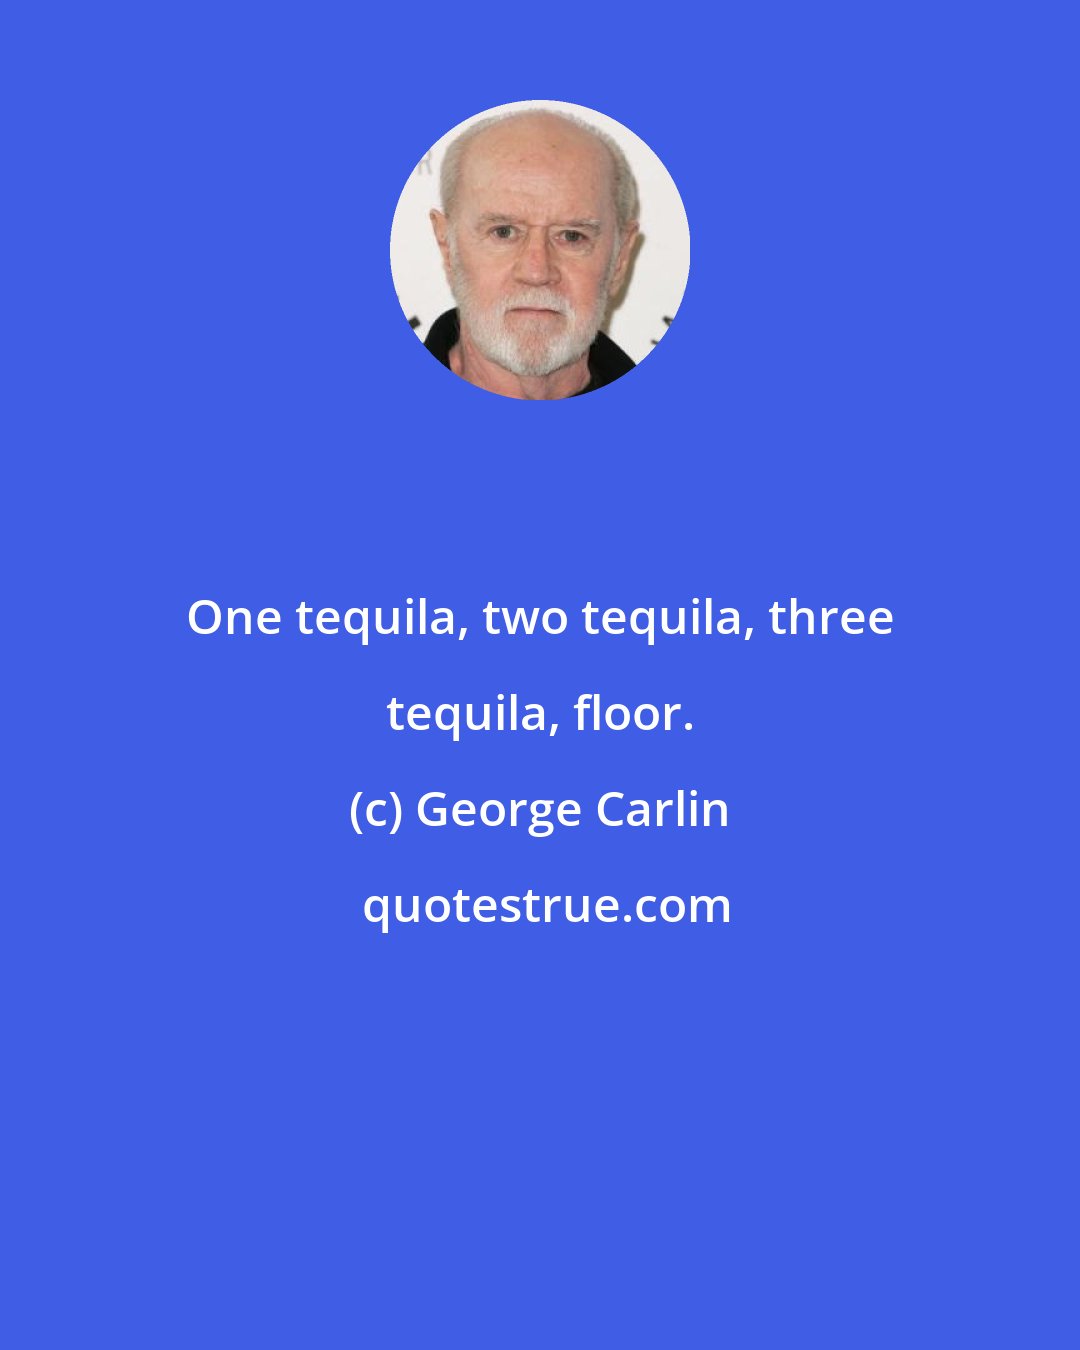 George Carlin: One tequila, two tequila, three tequila, floor.